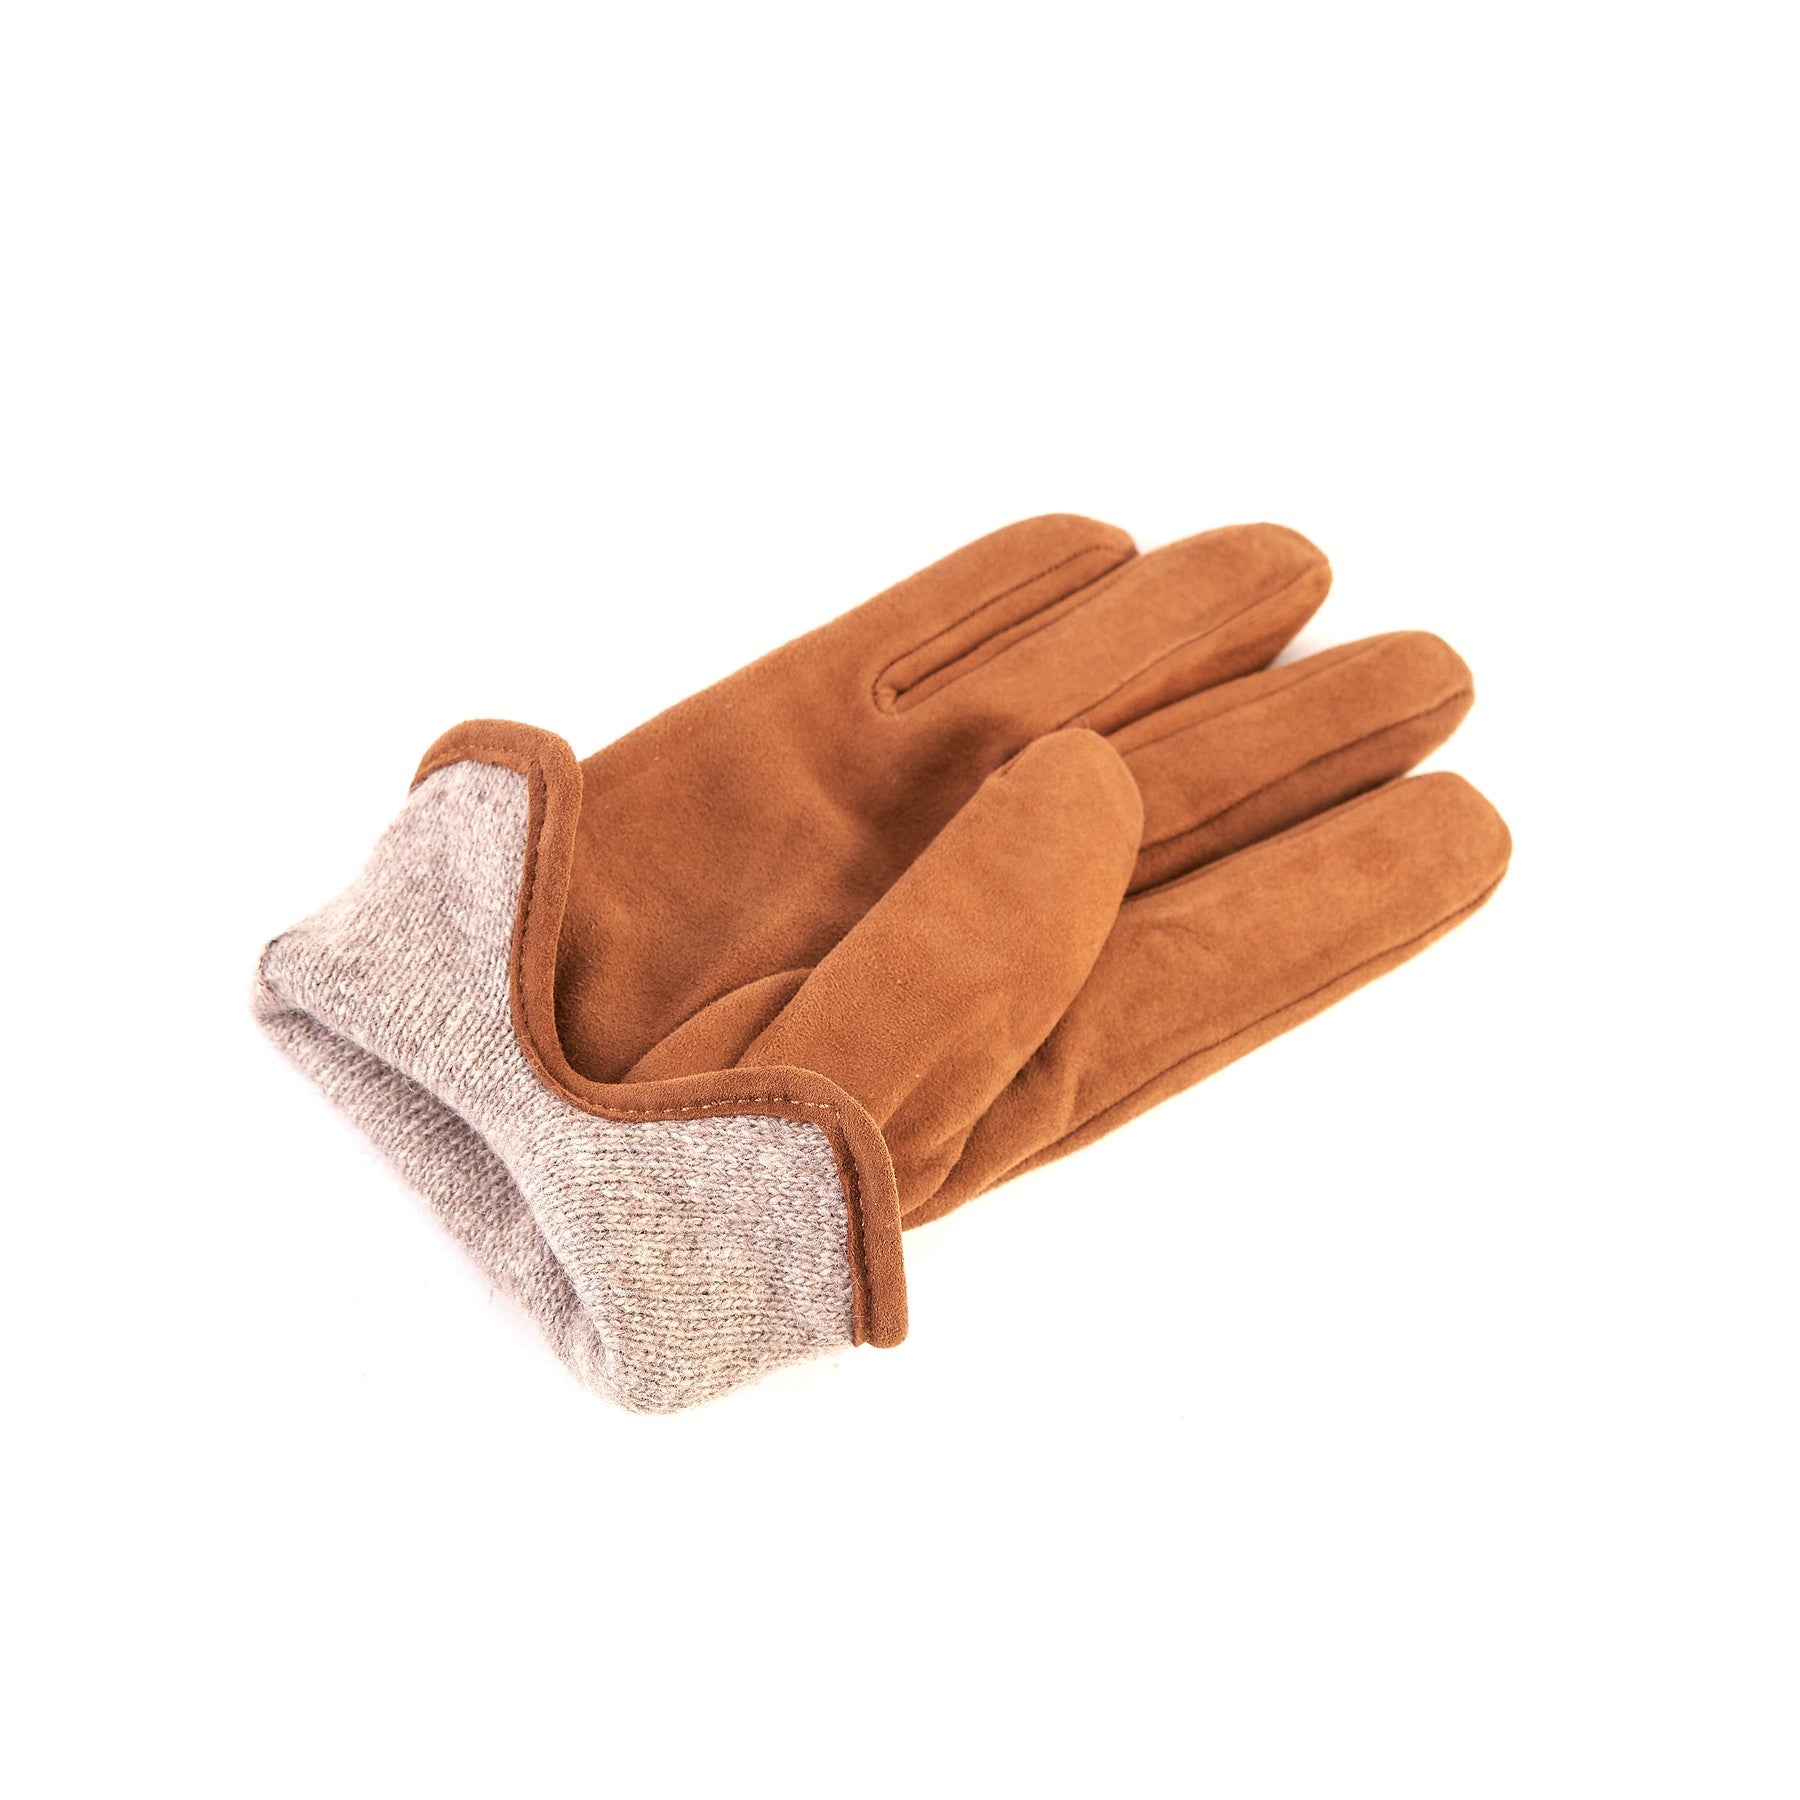 Women’s basic tobacco soft suede leather gloves with palm opening and mix cashmere lining